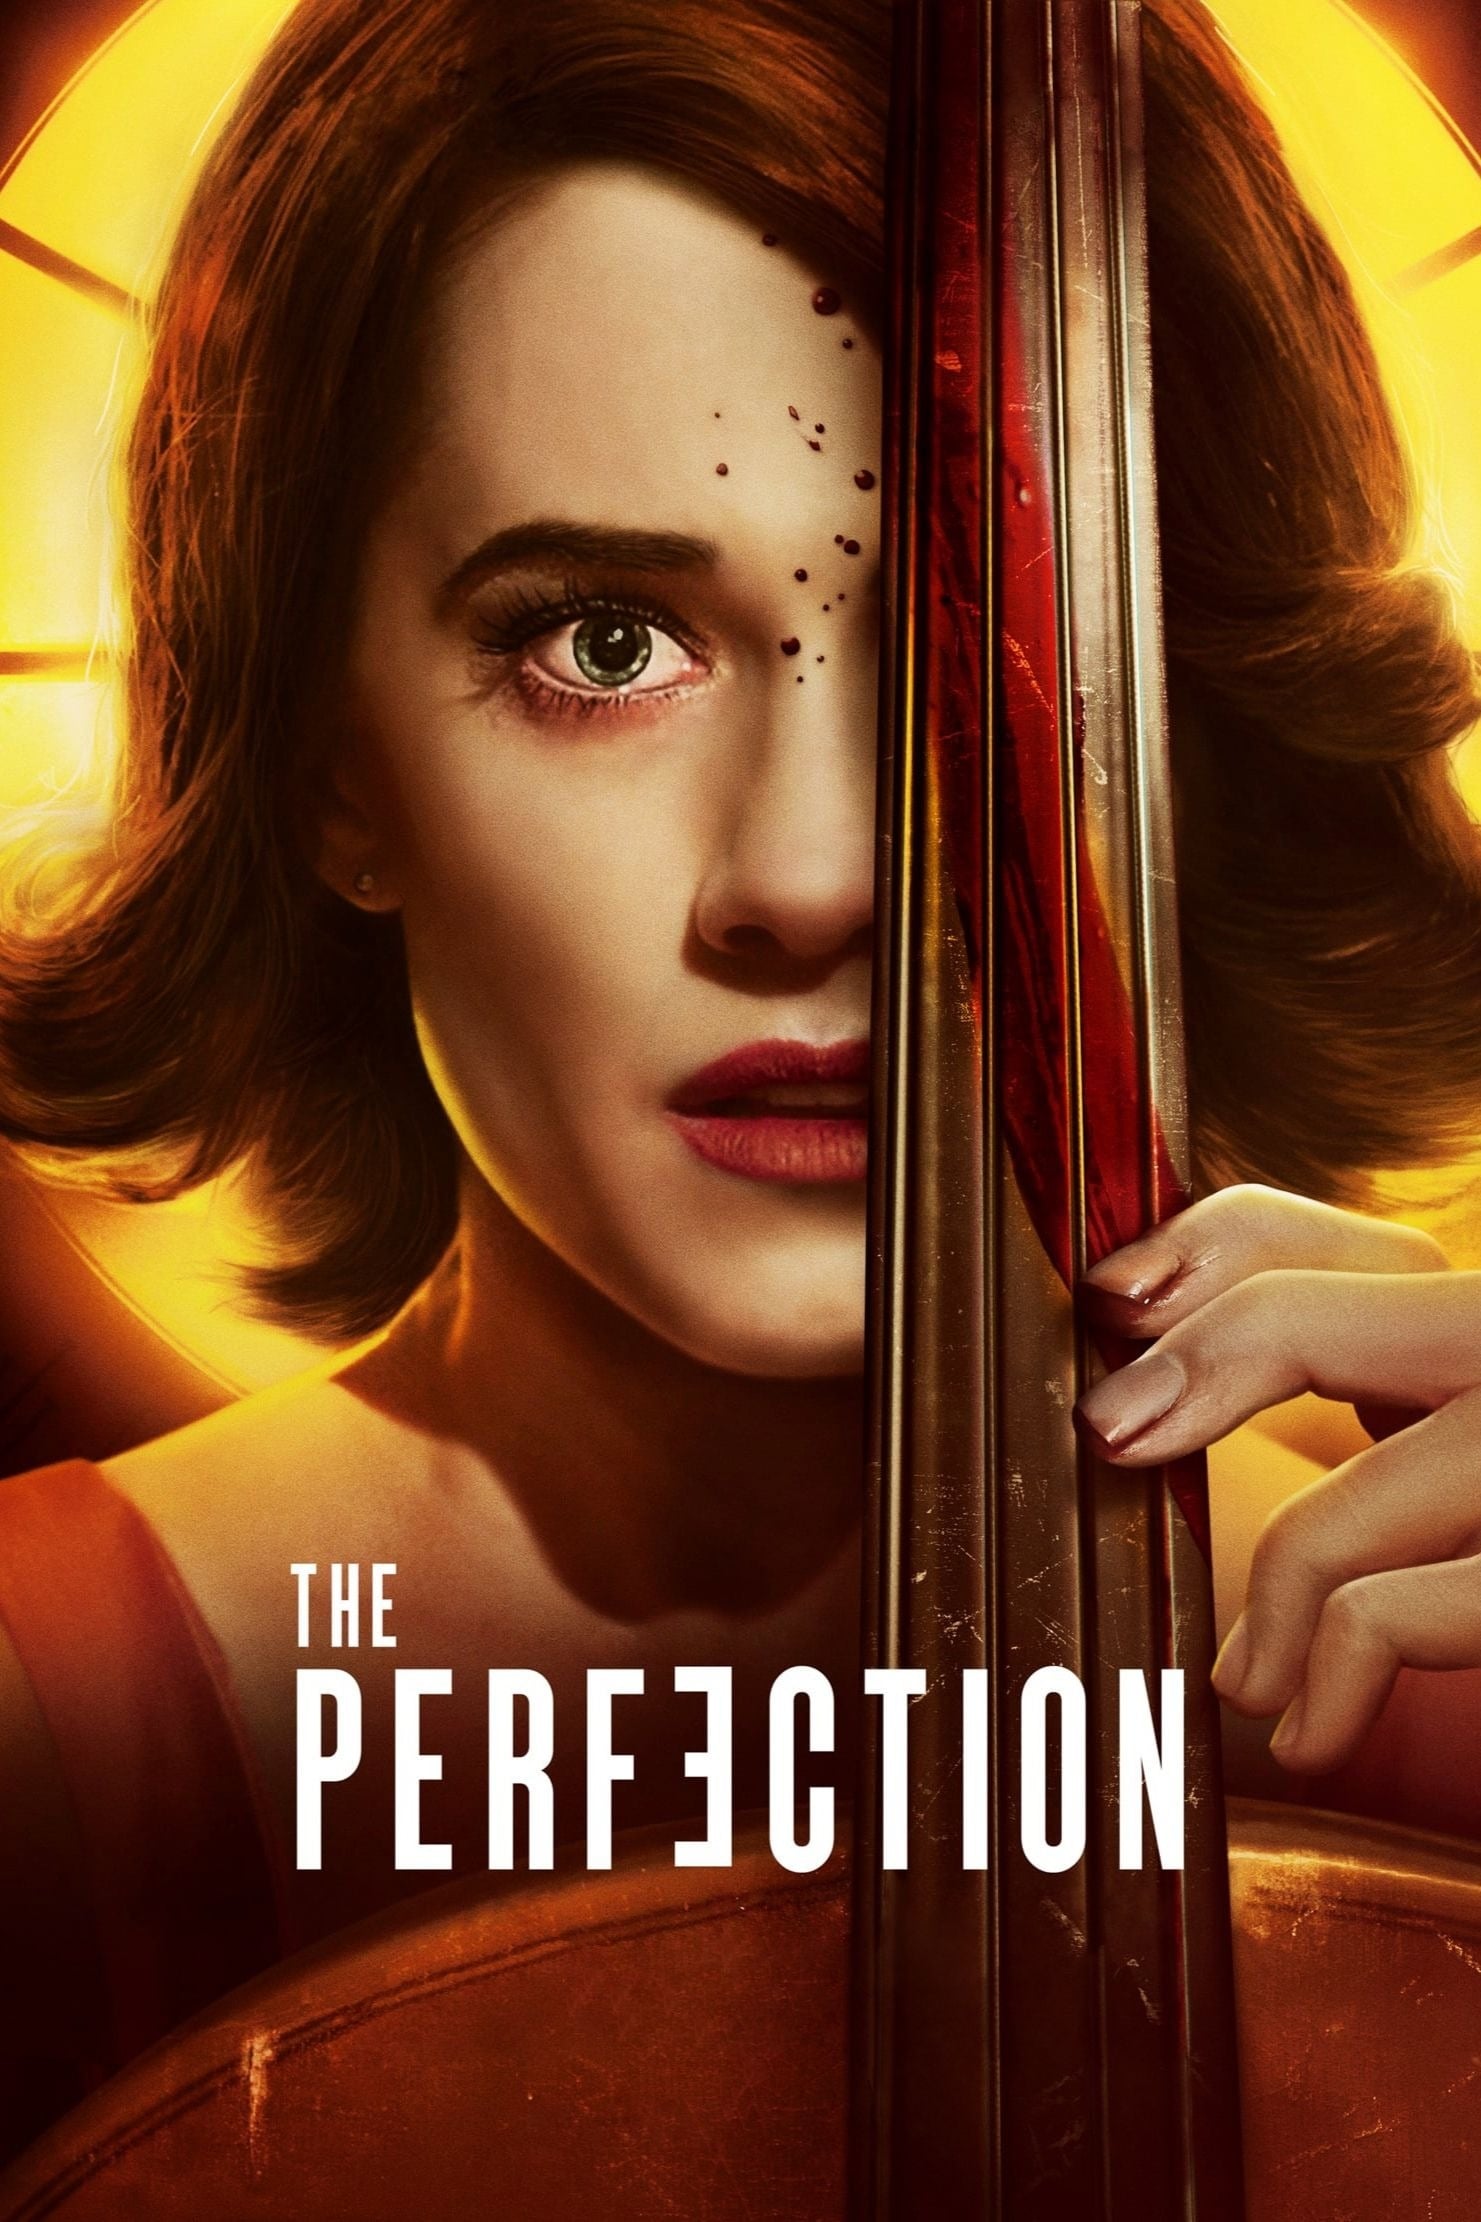 Poster for the movie "The Perfection"